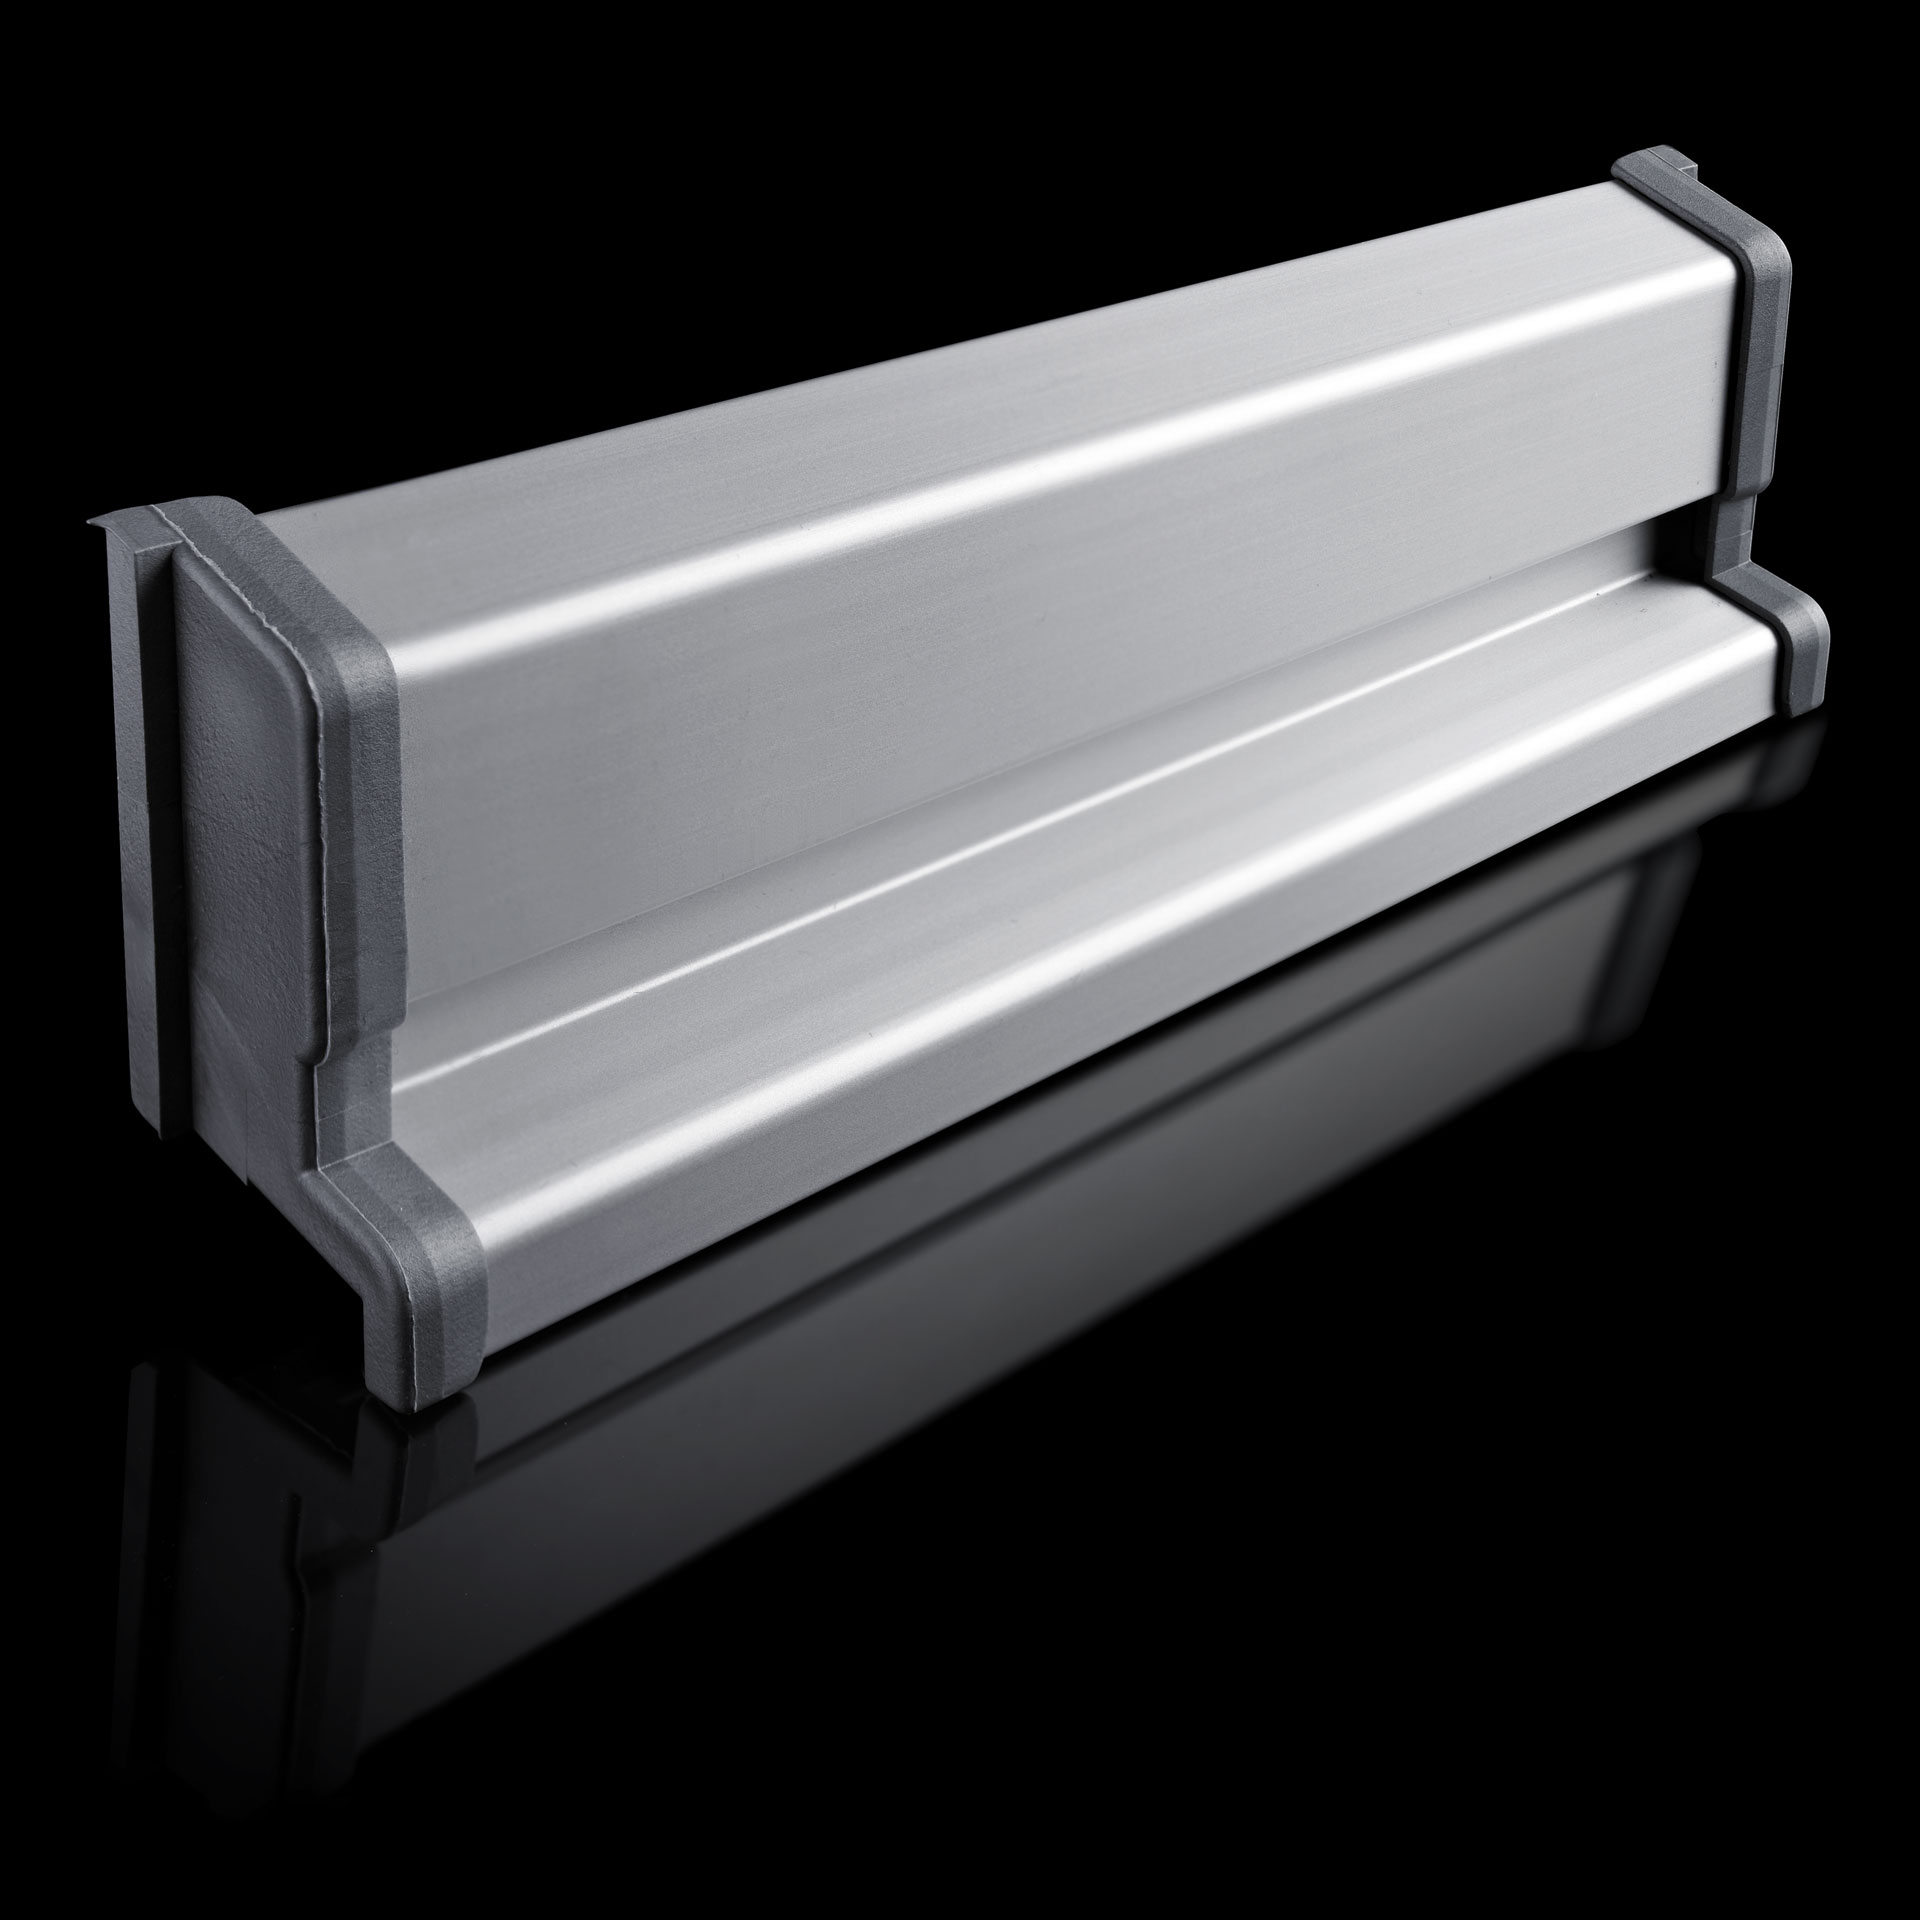 GUTMANN Weather Bars Spree / Spree-D and Sash Covering Profiles offer greatest possible protection from rain via a controlled surface water drainage. Optimal rear ventilation.